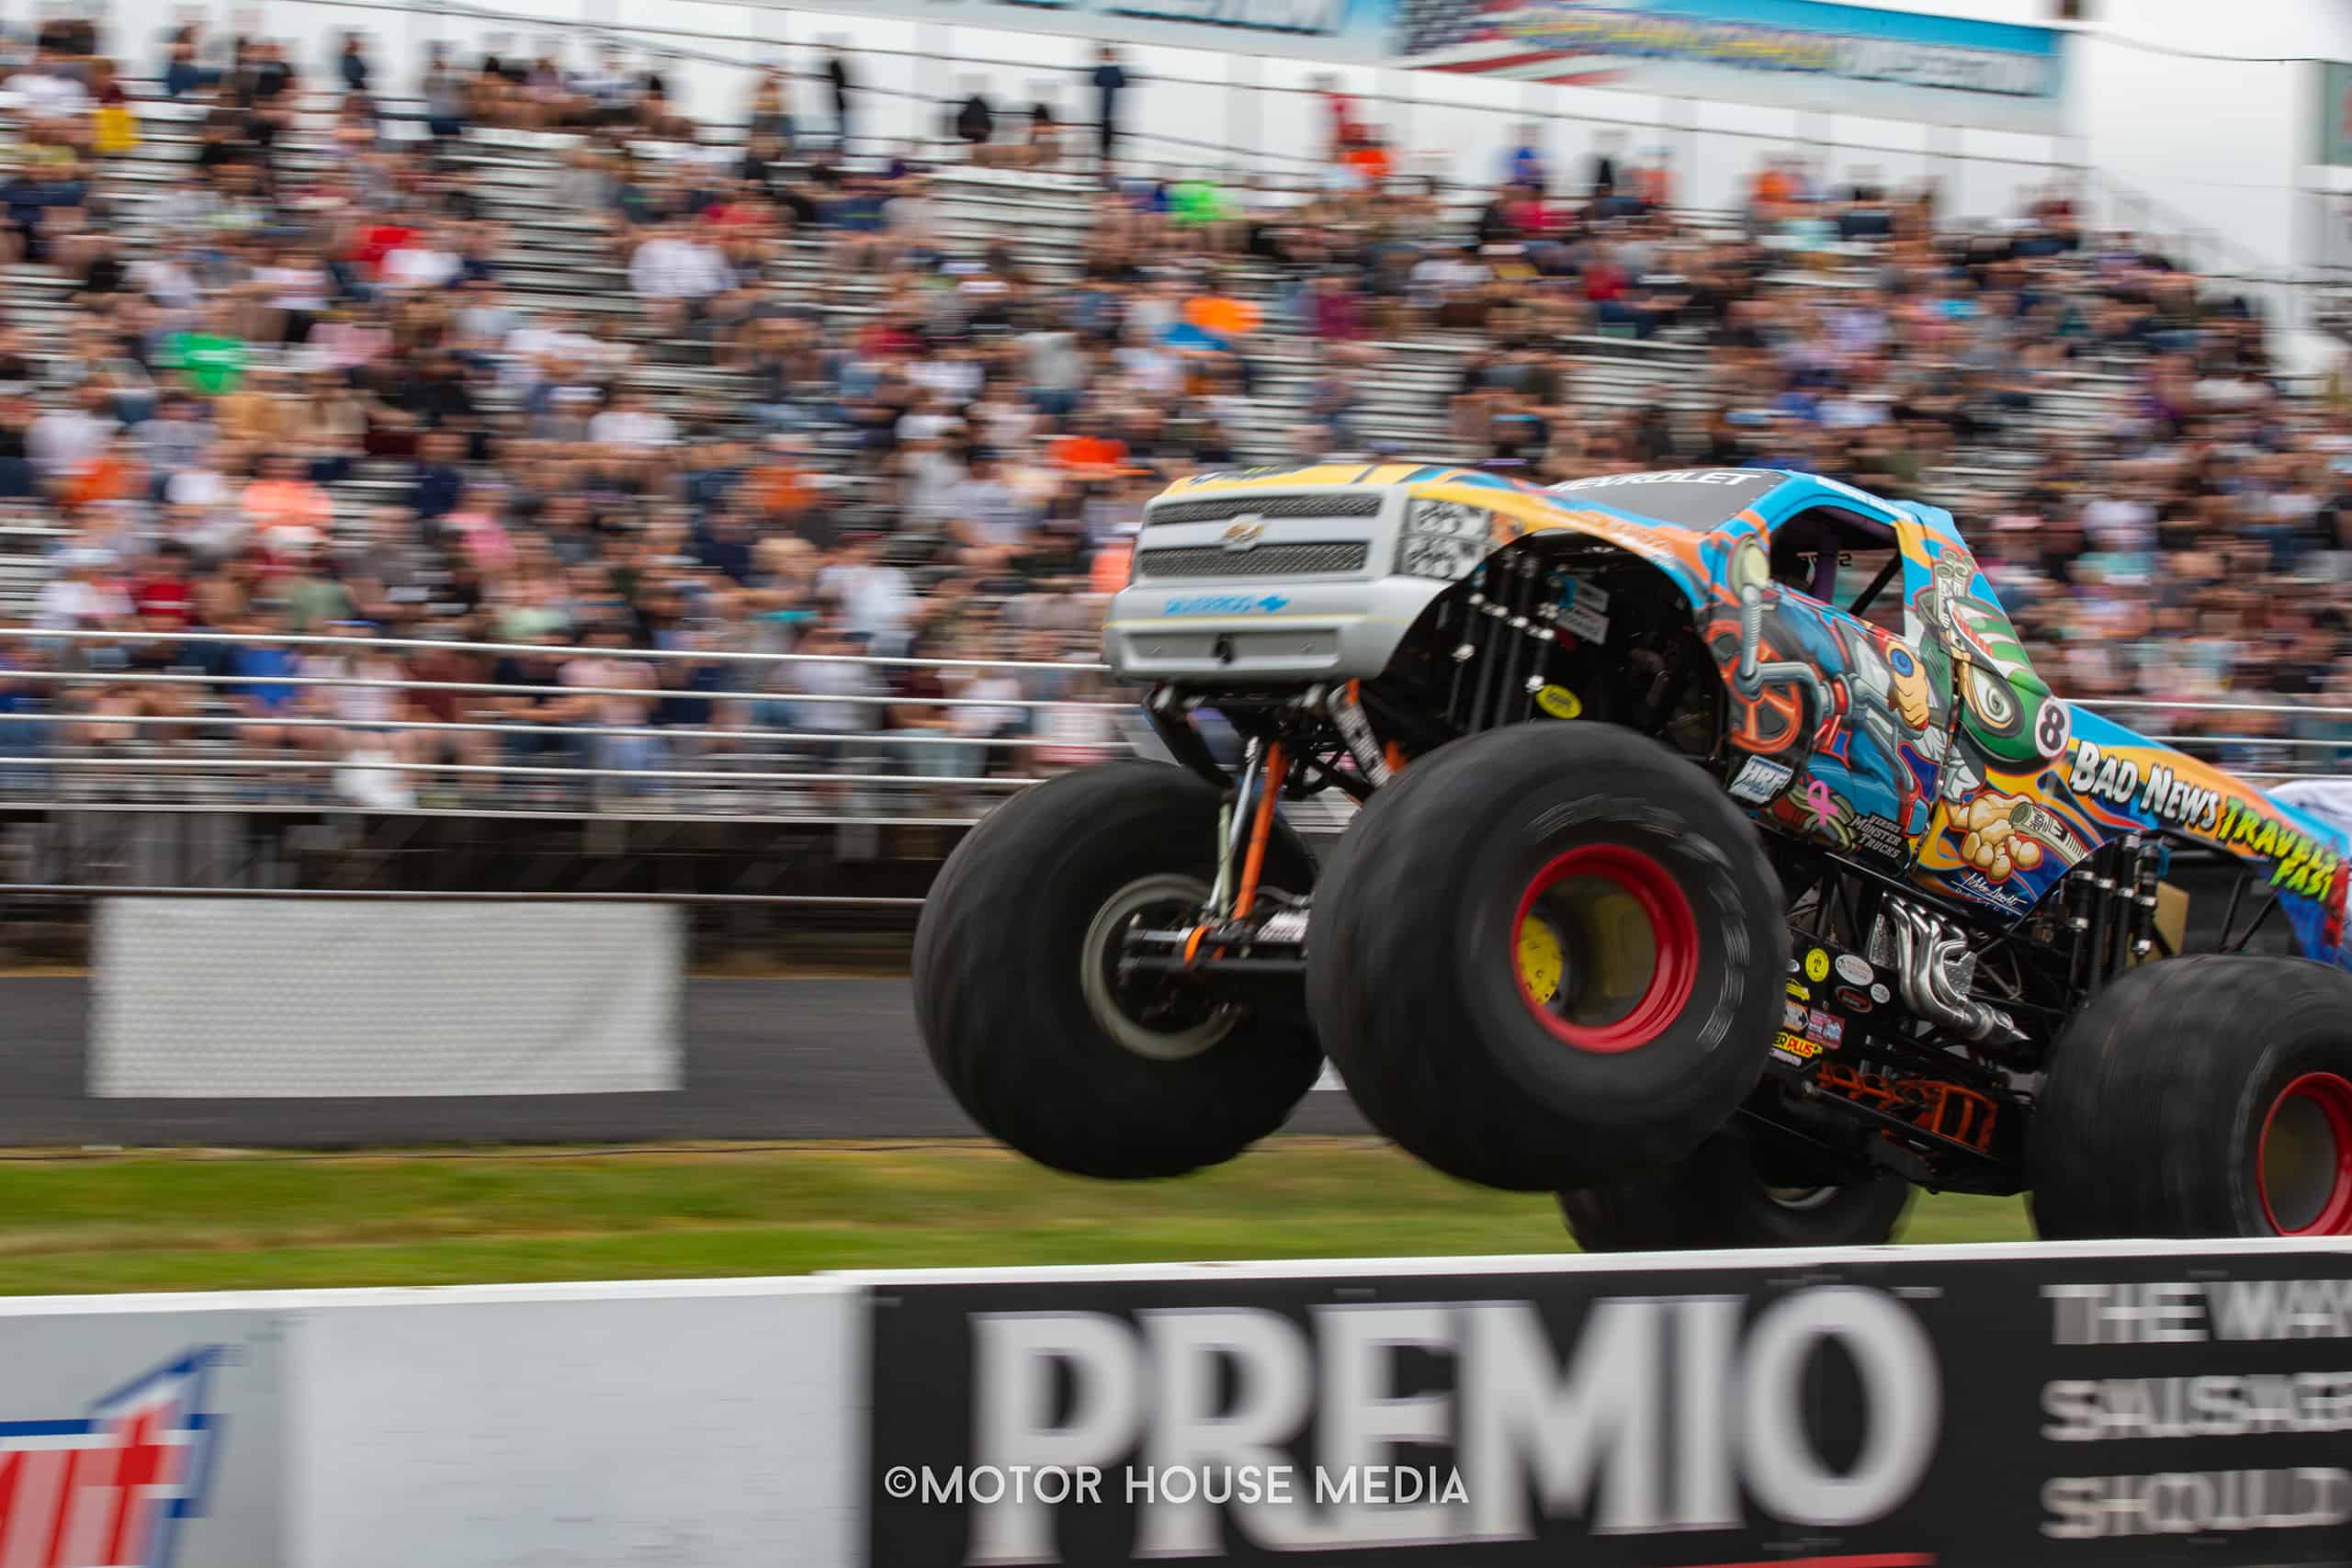 Monster truck in action at The Turn 5 auto show featuring Cars, trucks & Jeeps